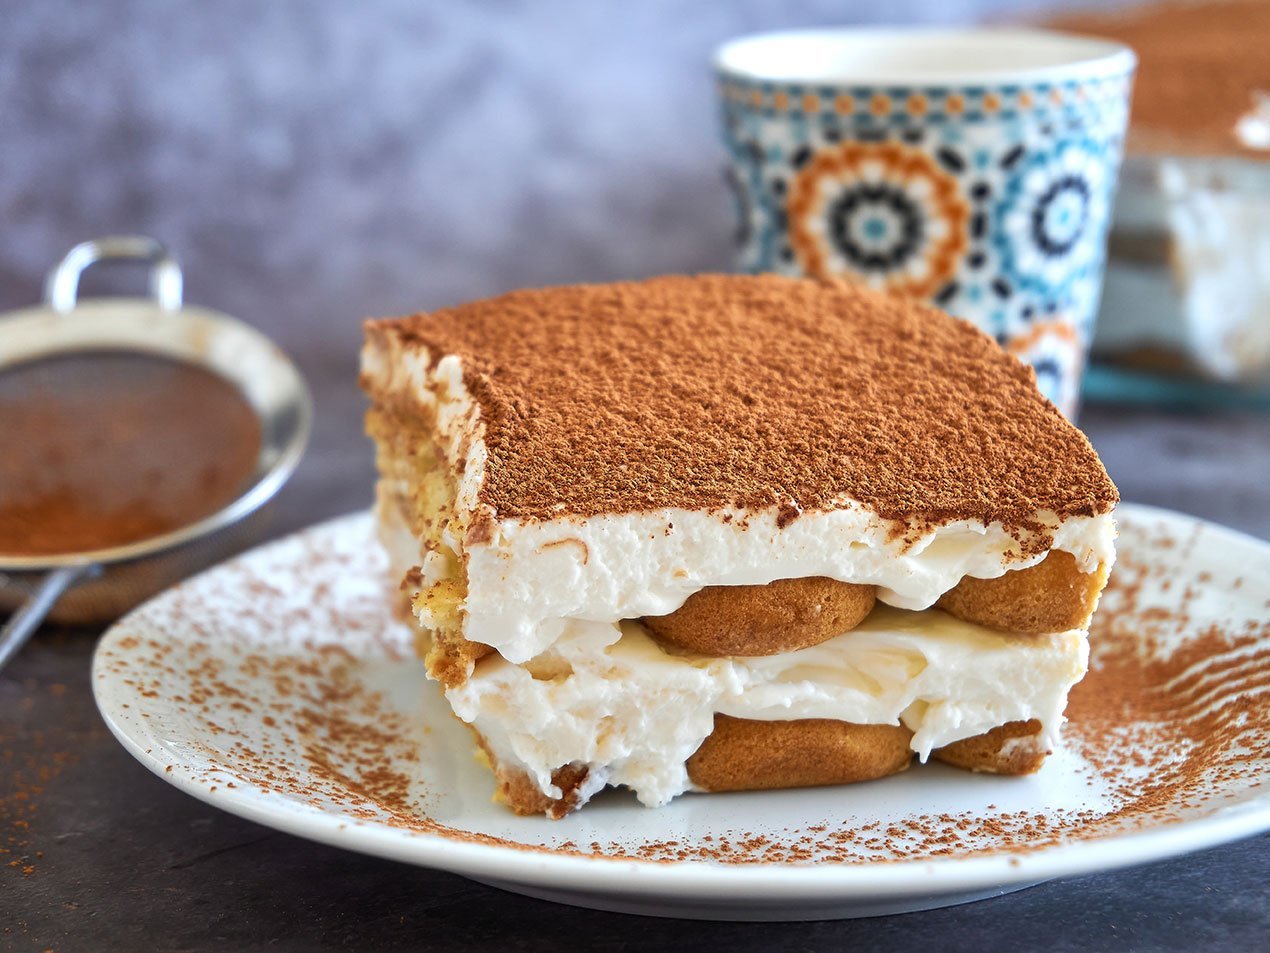 Square Slice Of Tiramisu Cake And A Cup Of Coffee In The Backgro